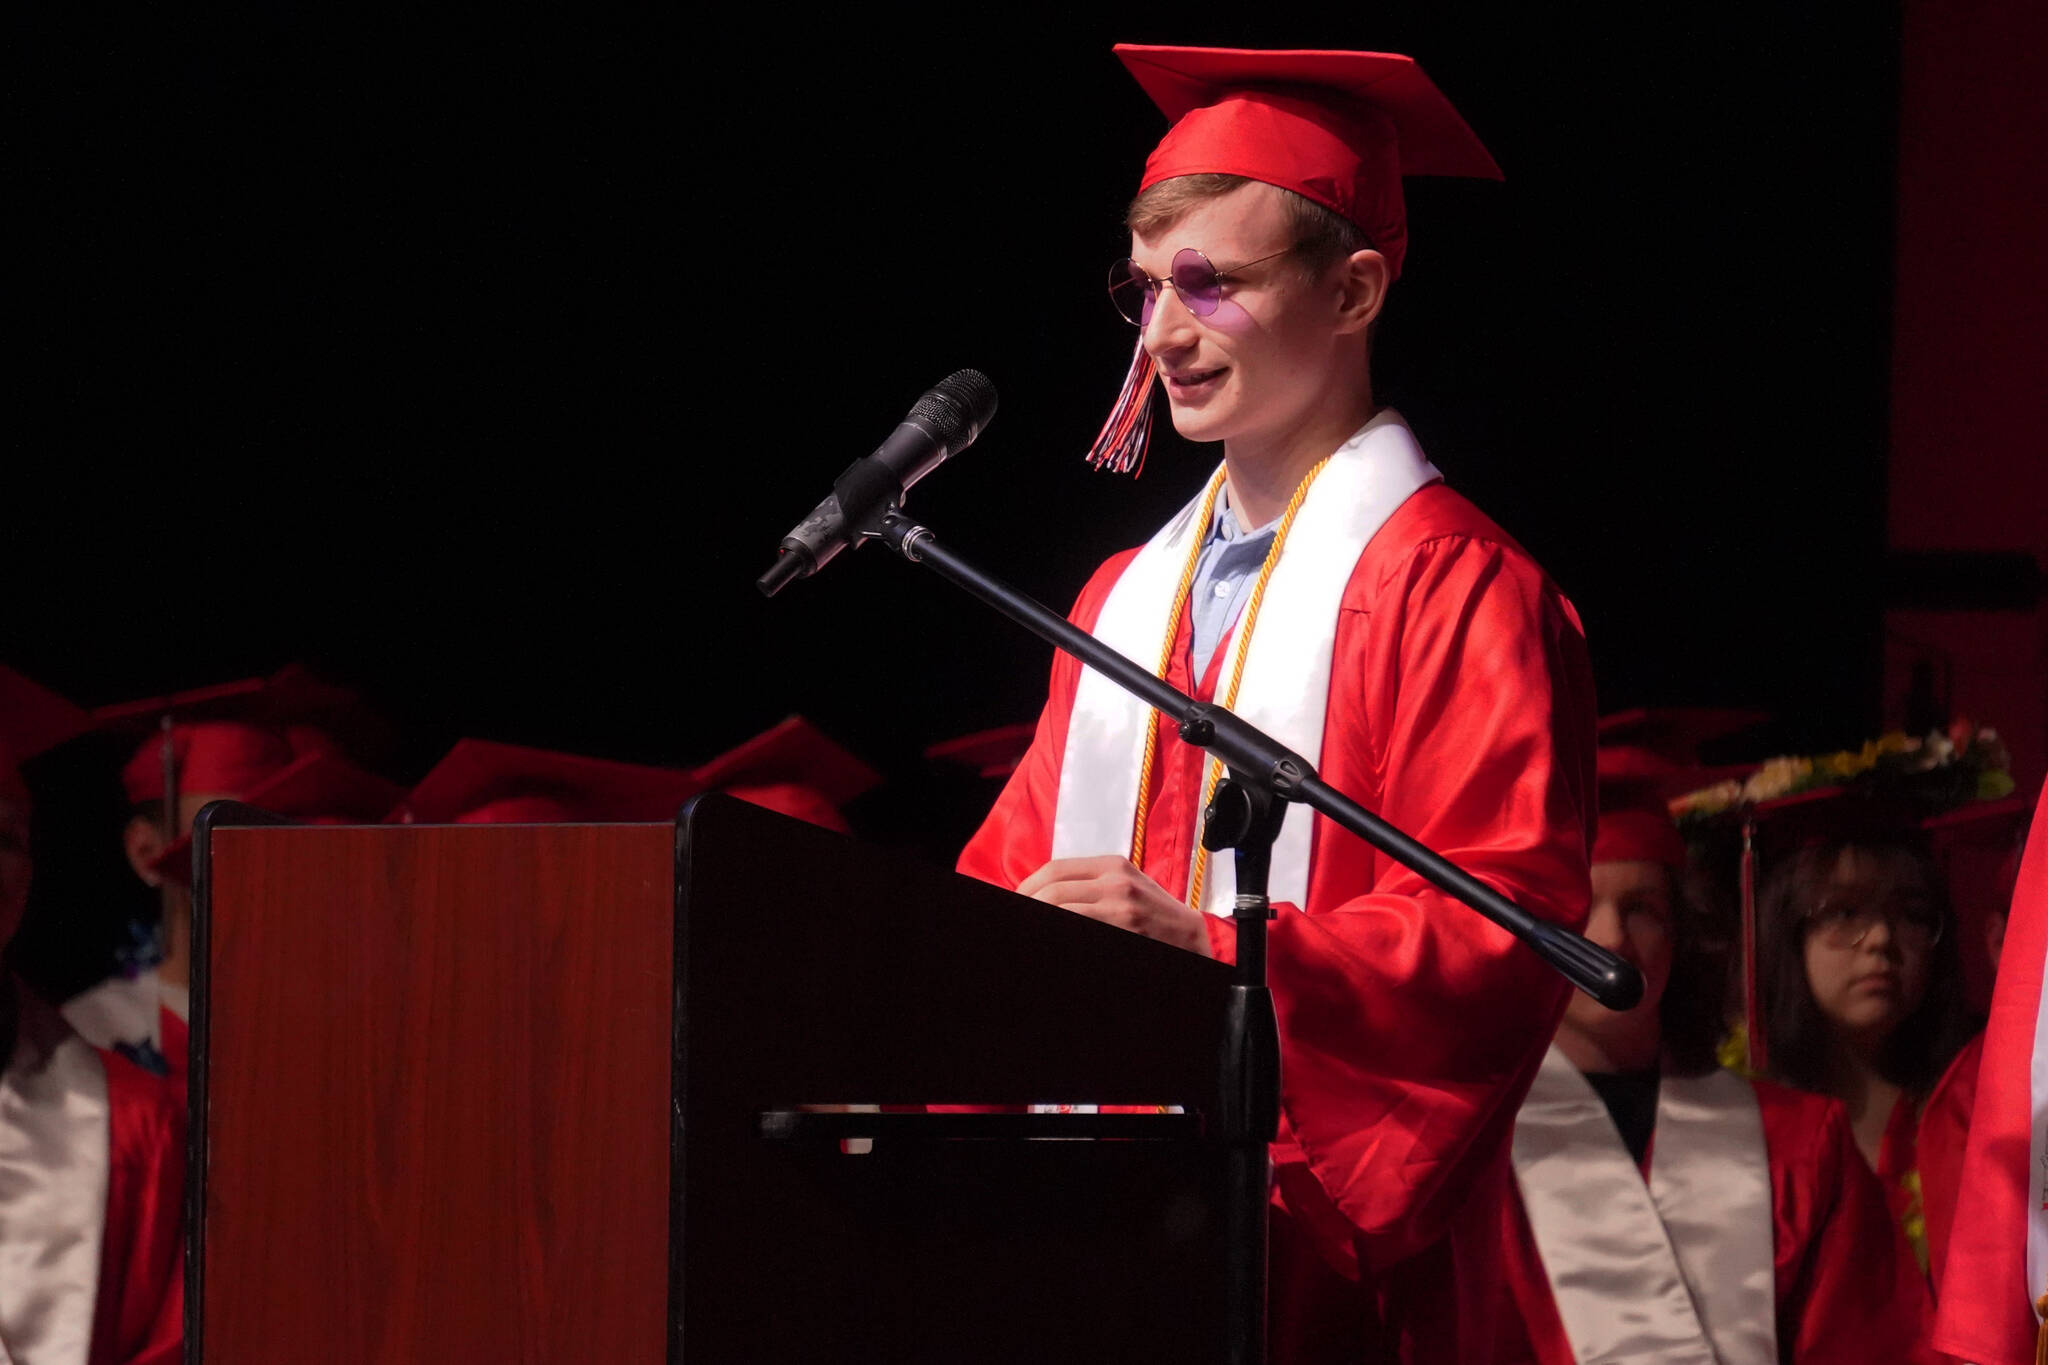 Andrew Gathle, one of the valedictorians, addresses the Kenai Central High School Class of 2023 during a graduation ceremony on Wednesday, May 17, 2023, at Kenai Central High School in Kenai, Alaska. (Jake Dye/Peninsula Clarion)